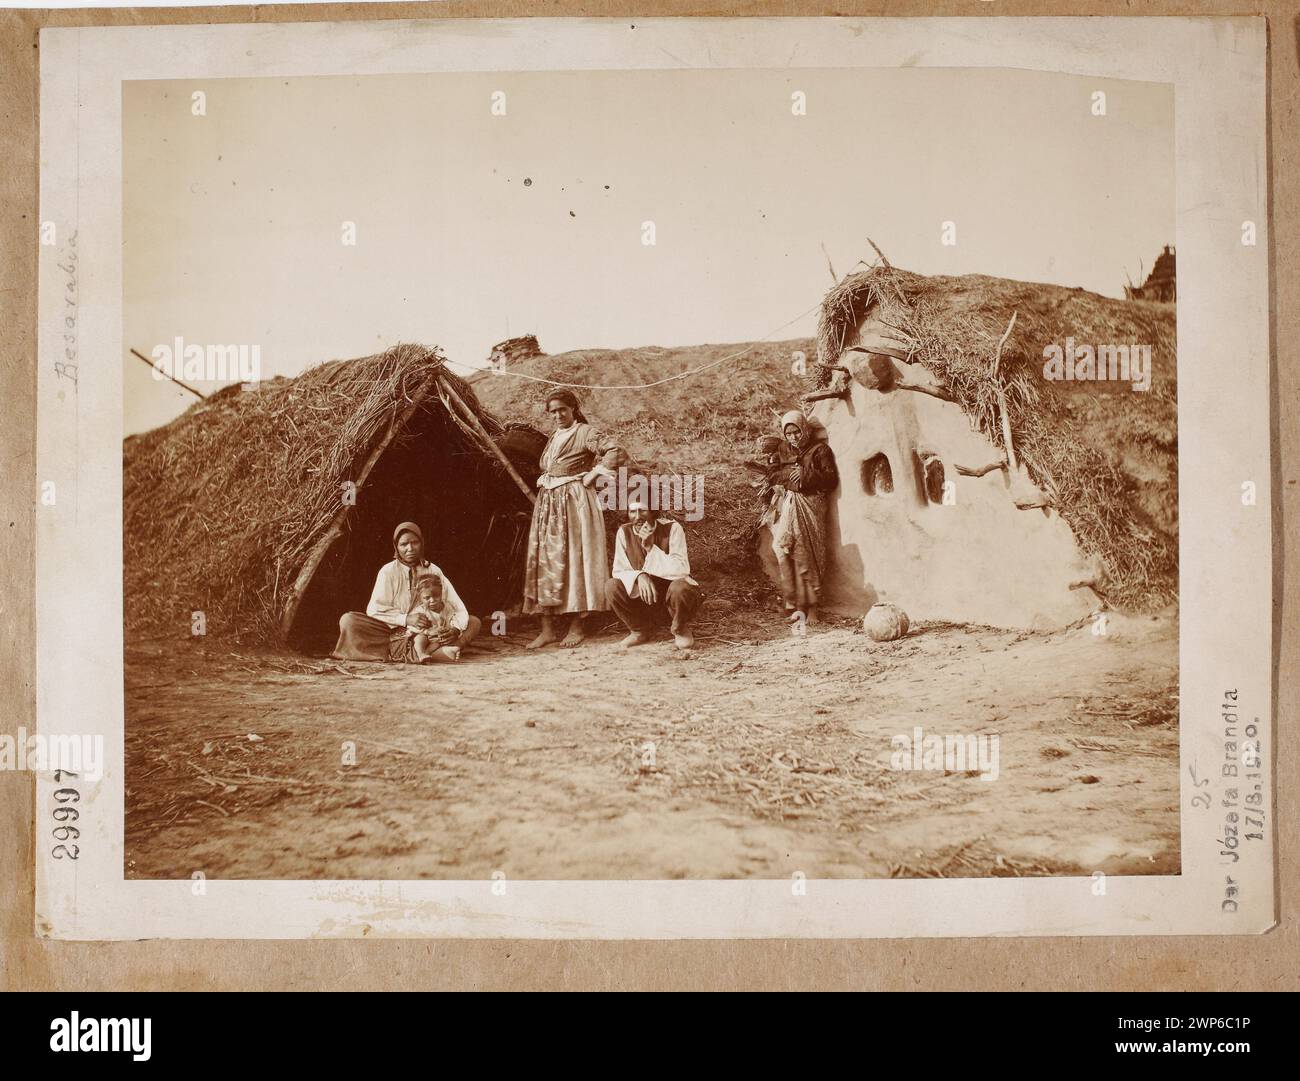 Besarabia. Known [Gypsies] in front of the muddy [photography from the collection of Józef Brandt, a painter; Used when painting the painting 'Sharp Ski' from 1889];  the eighties of the 19th century (1880-00-00-1890-00-00);Besarabia, Brandt, Józef (1841-1915), Brandt, Józef (1841-1915) - collection, gypsies, art of photography (Warsaw - exhibition - 1990), huts, peasants, gift (provenance), ethnography, folk types, village, village, villagers Stock Photo